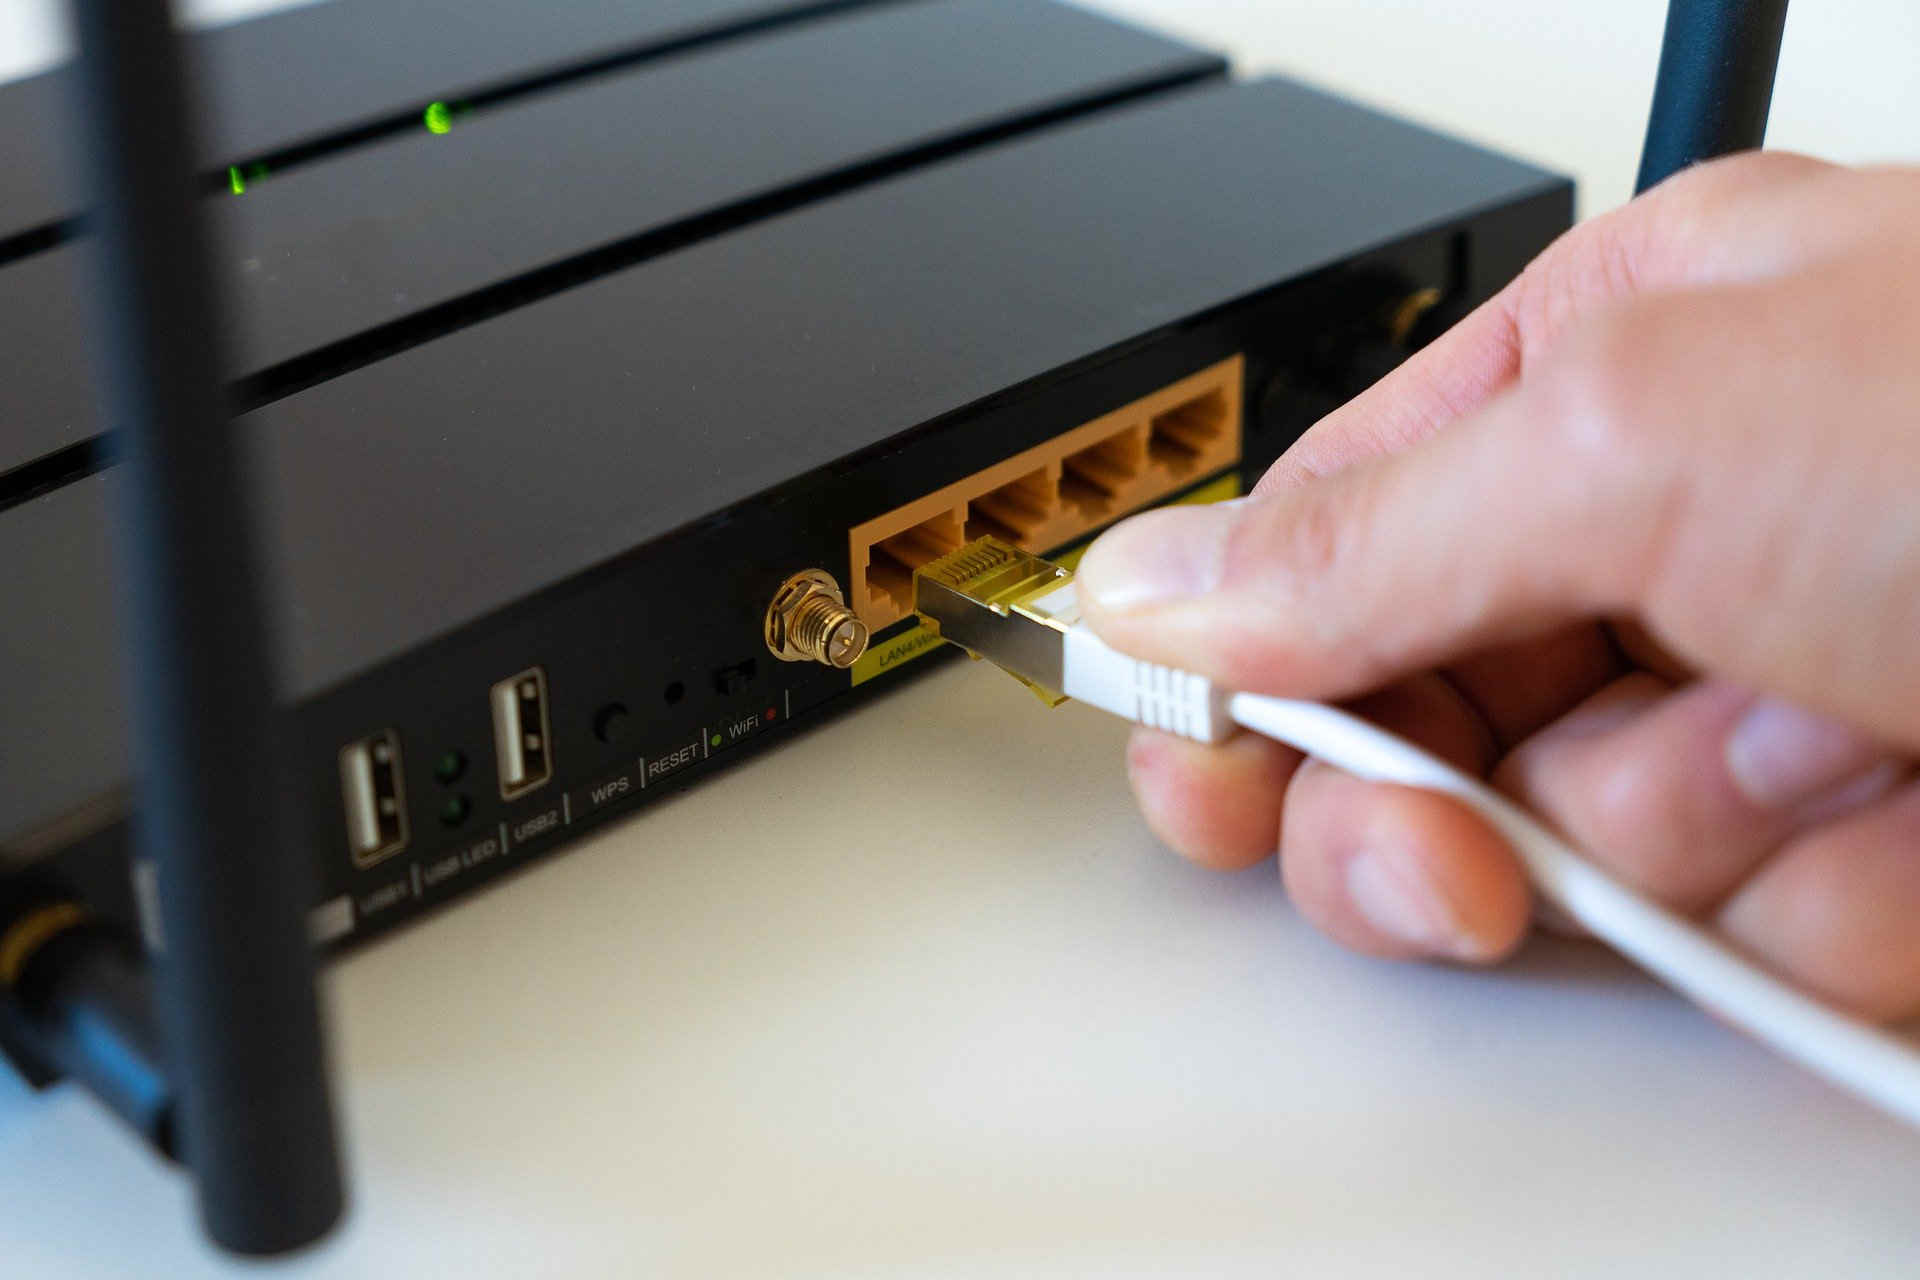 FIX: Broadband modem is experiencing connectivity problems